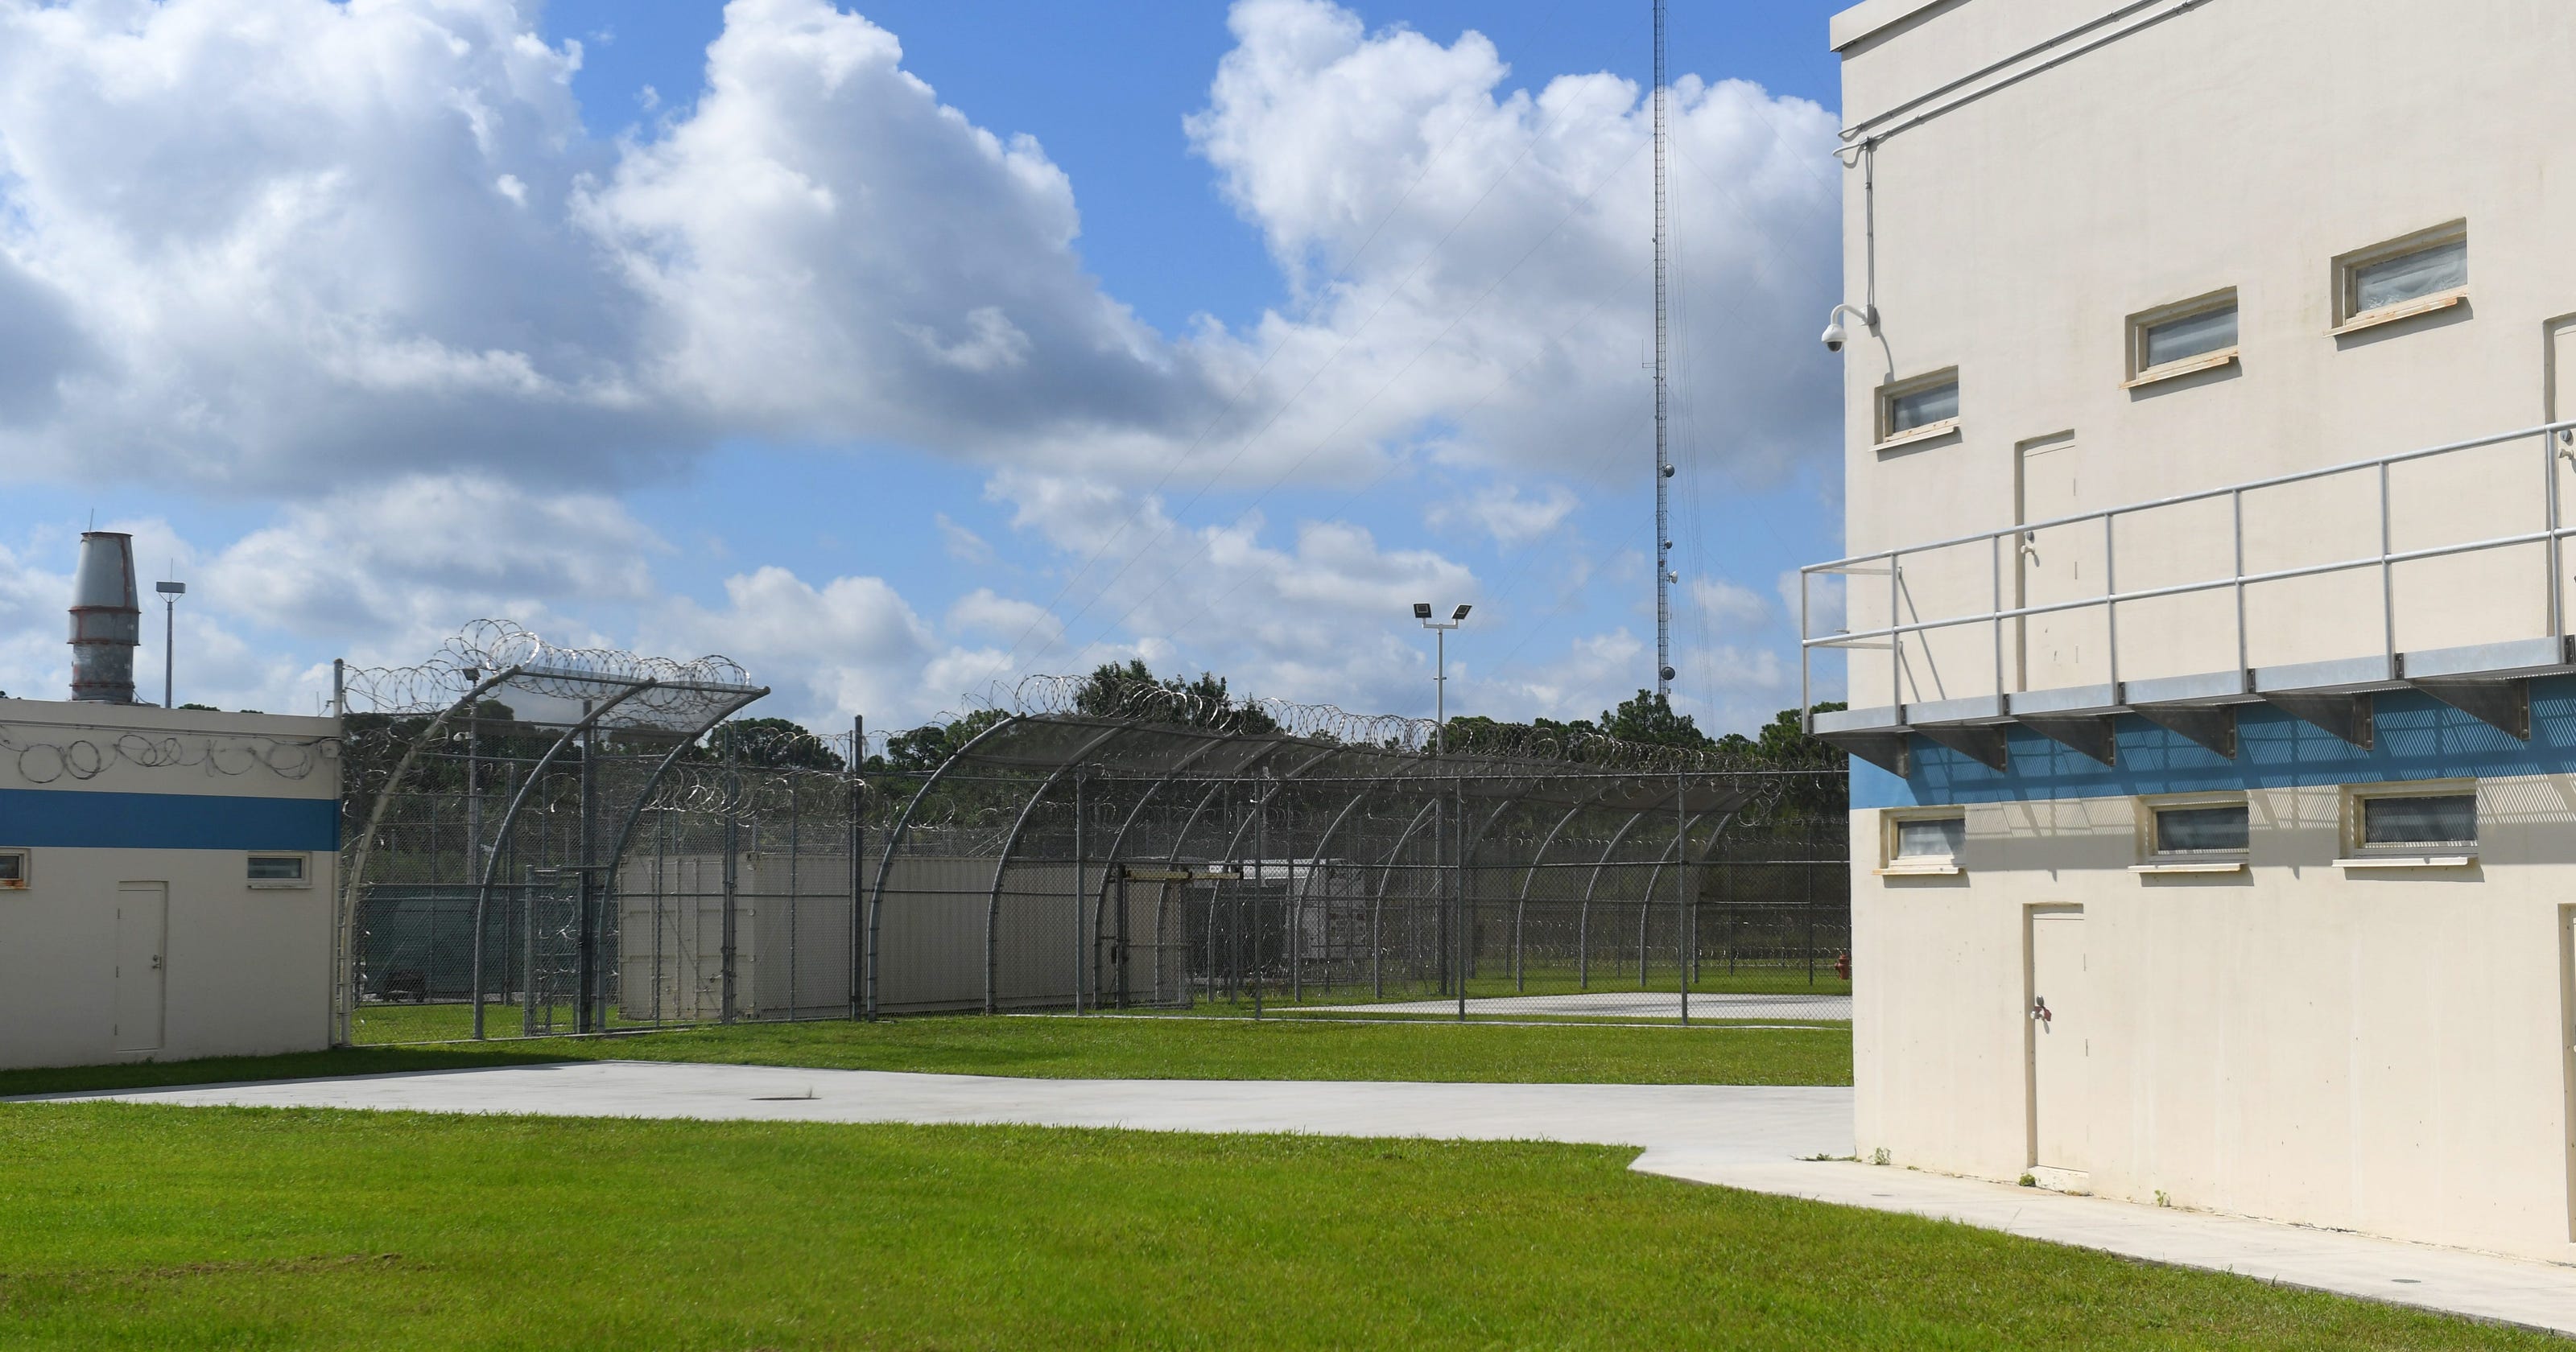 More COVID 19 cases in St Lucie County jail